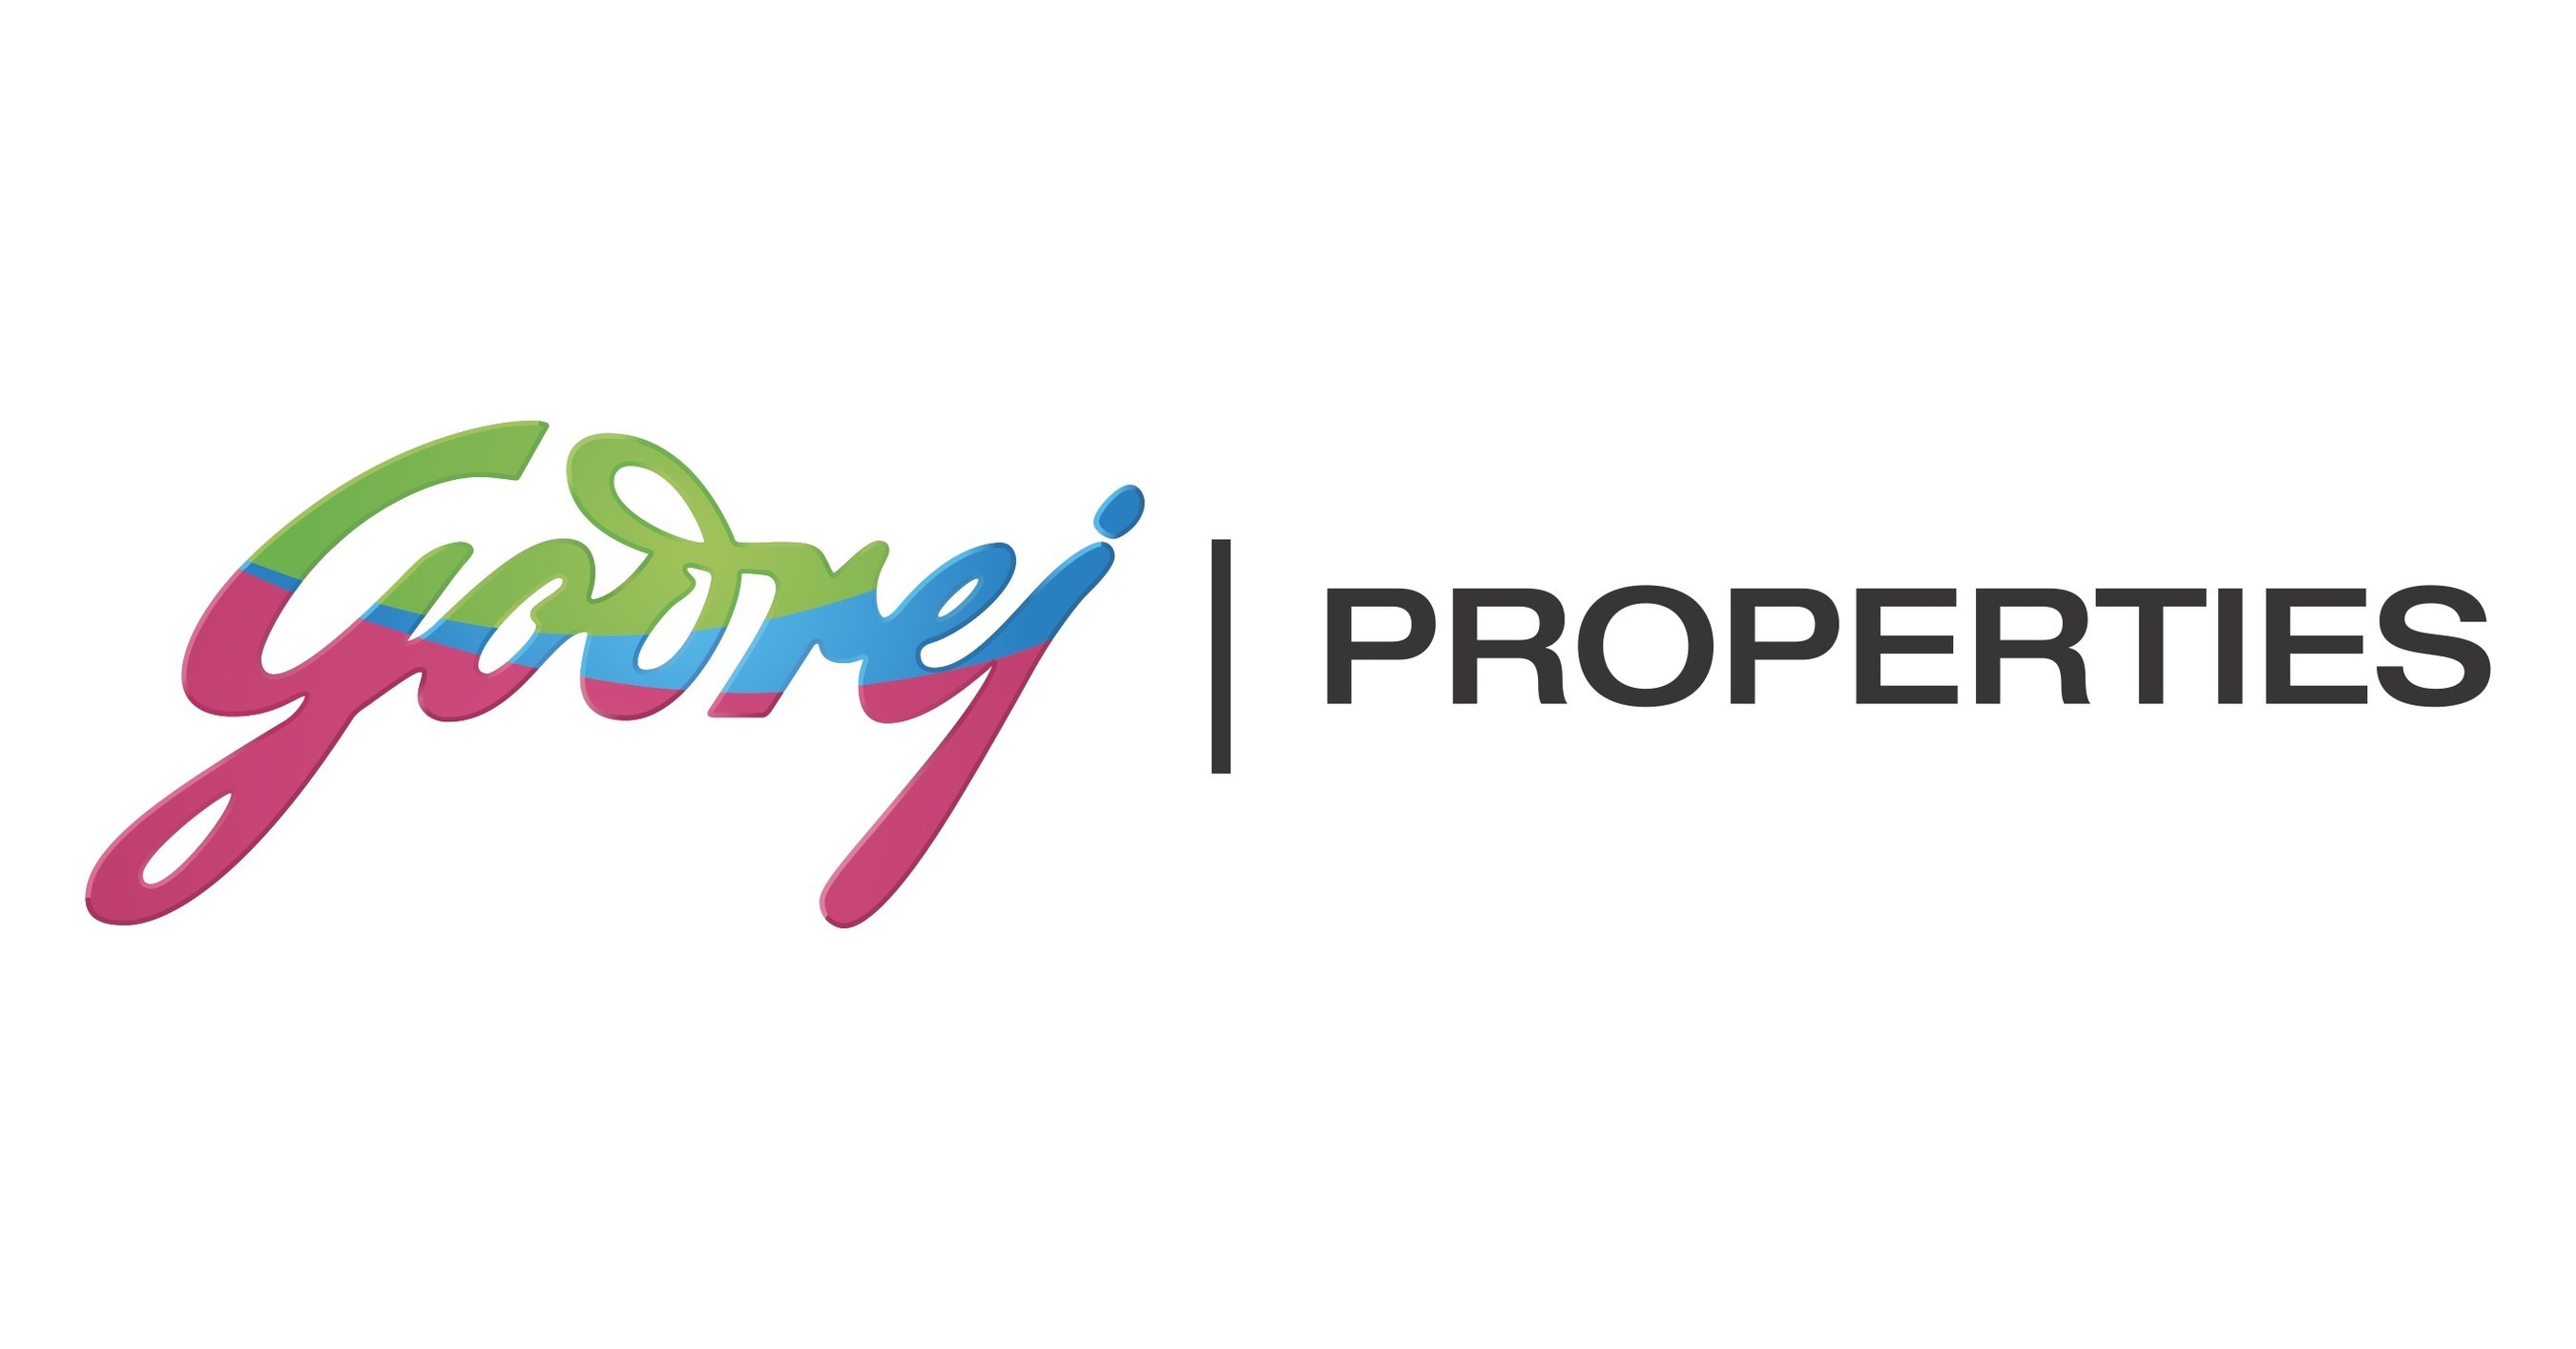 Godrej Properties launches its first digital brand campaign